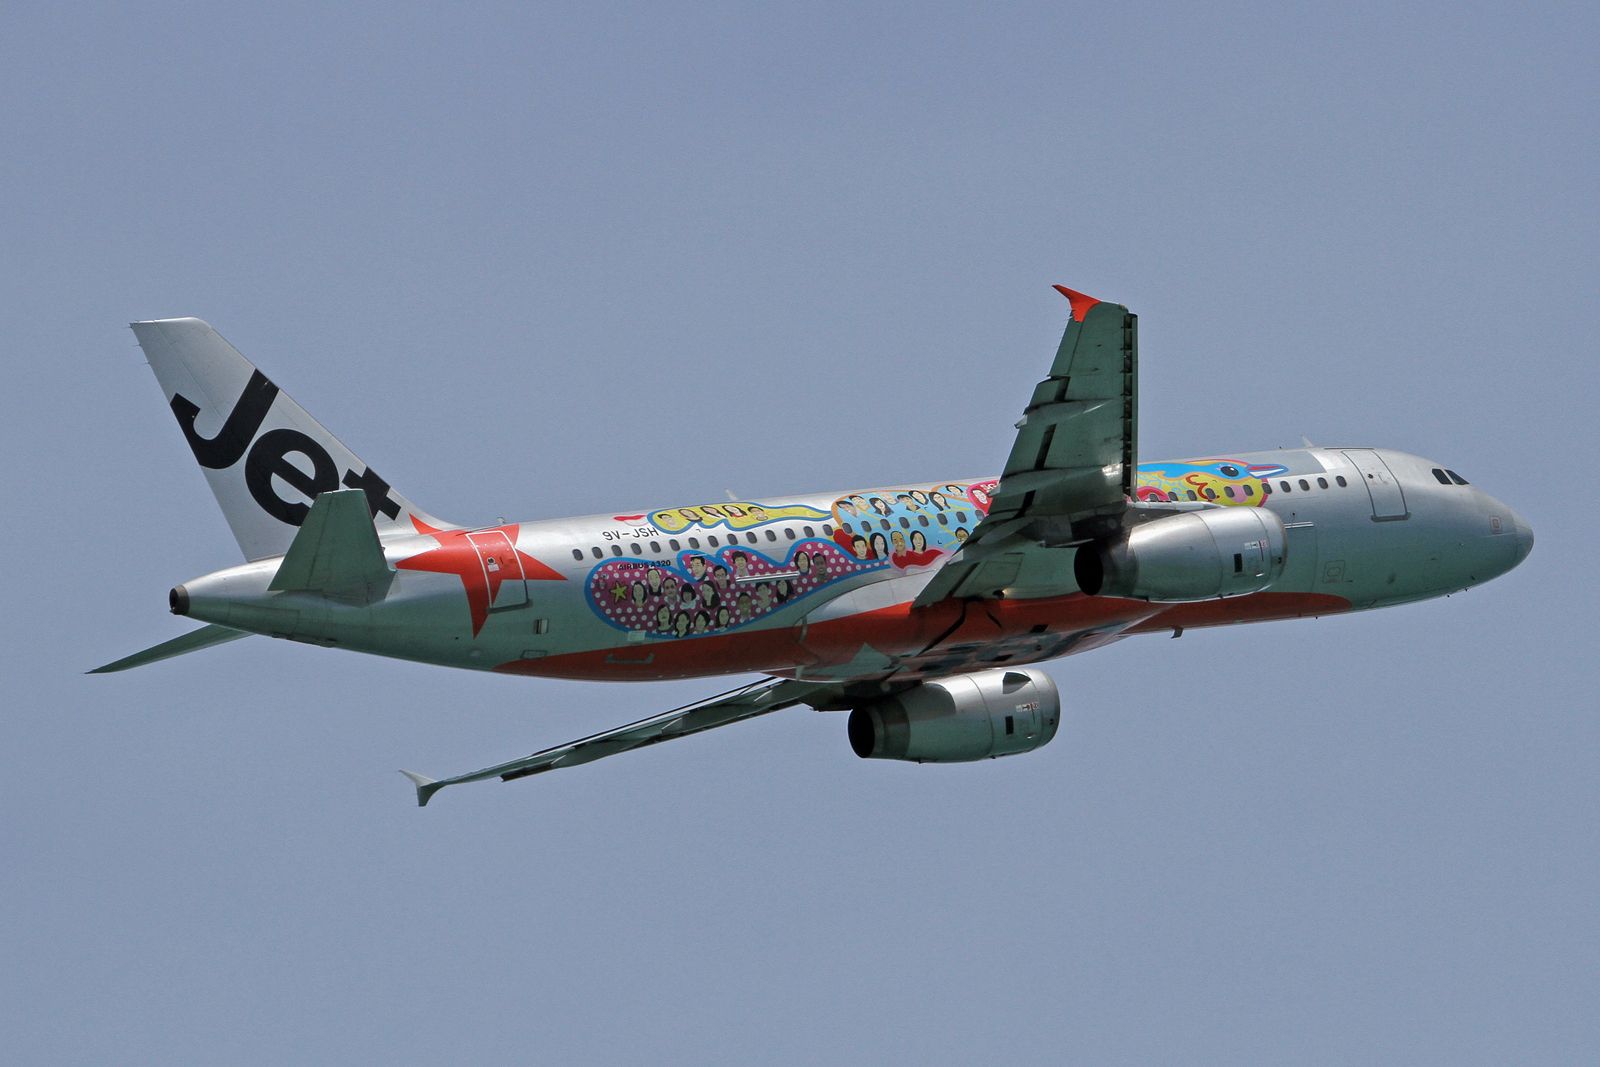 Airbus A320 (9V-JSH) - "Jetstar Asia's SG50" livery